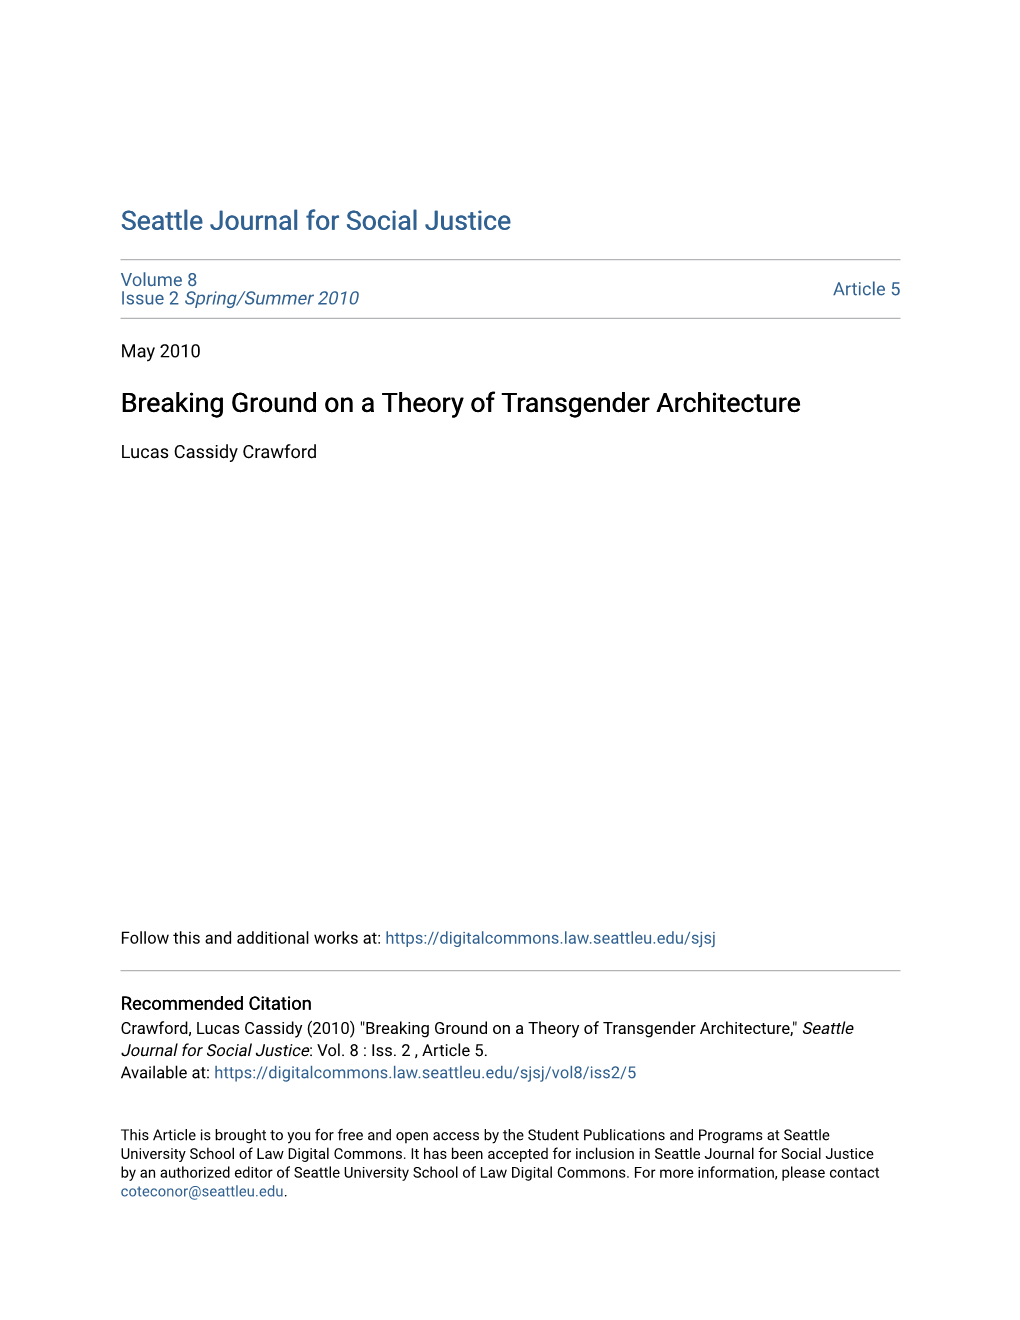 Breaking Ground on a Theory of Transgender Architecture